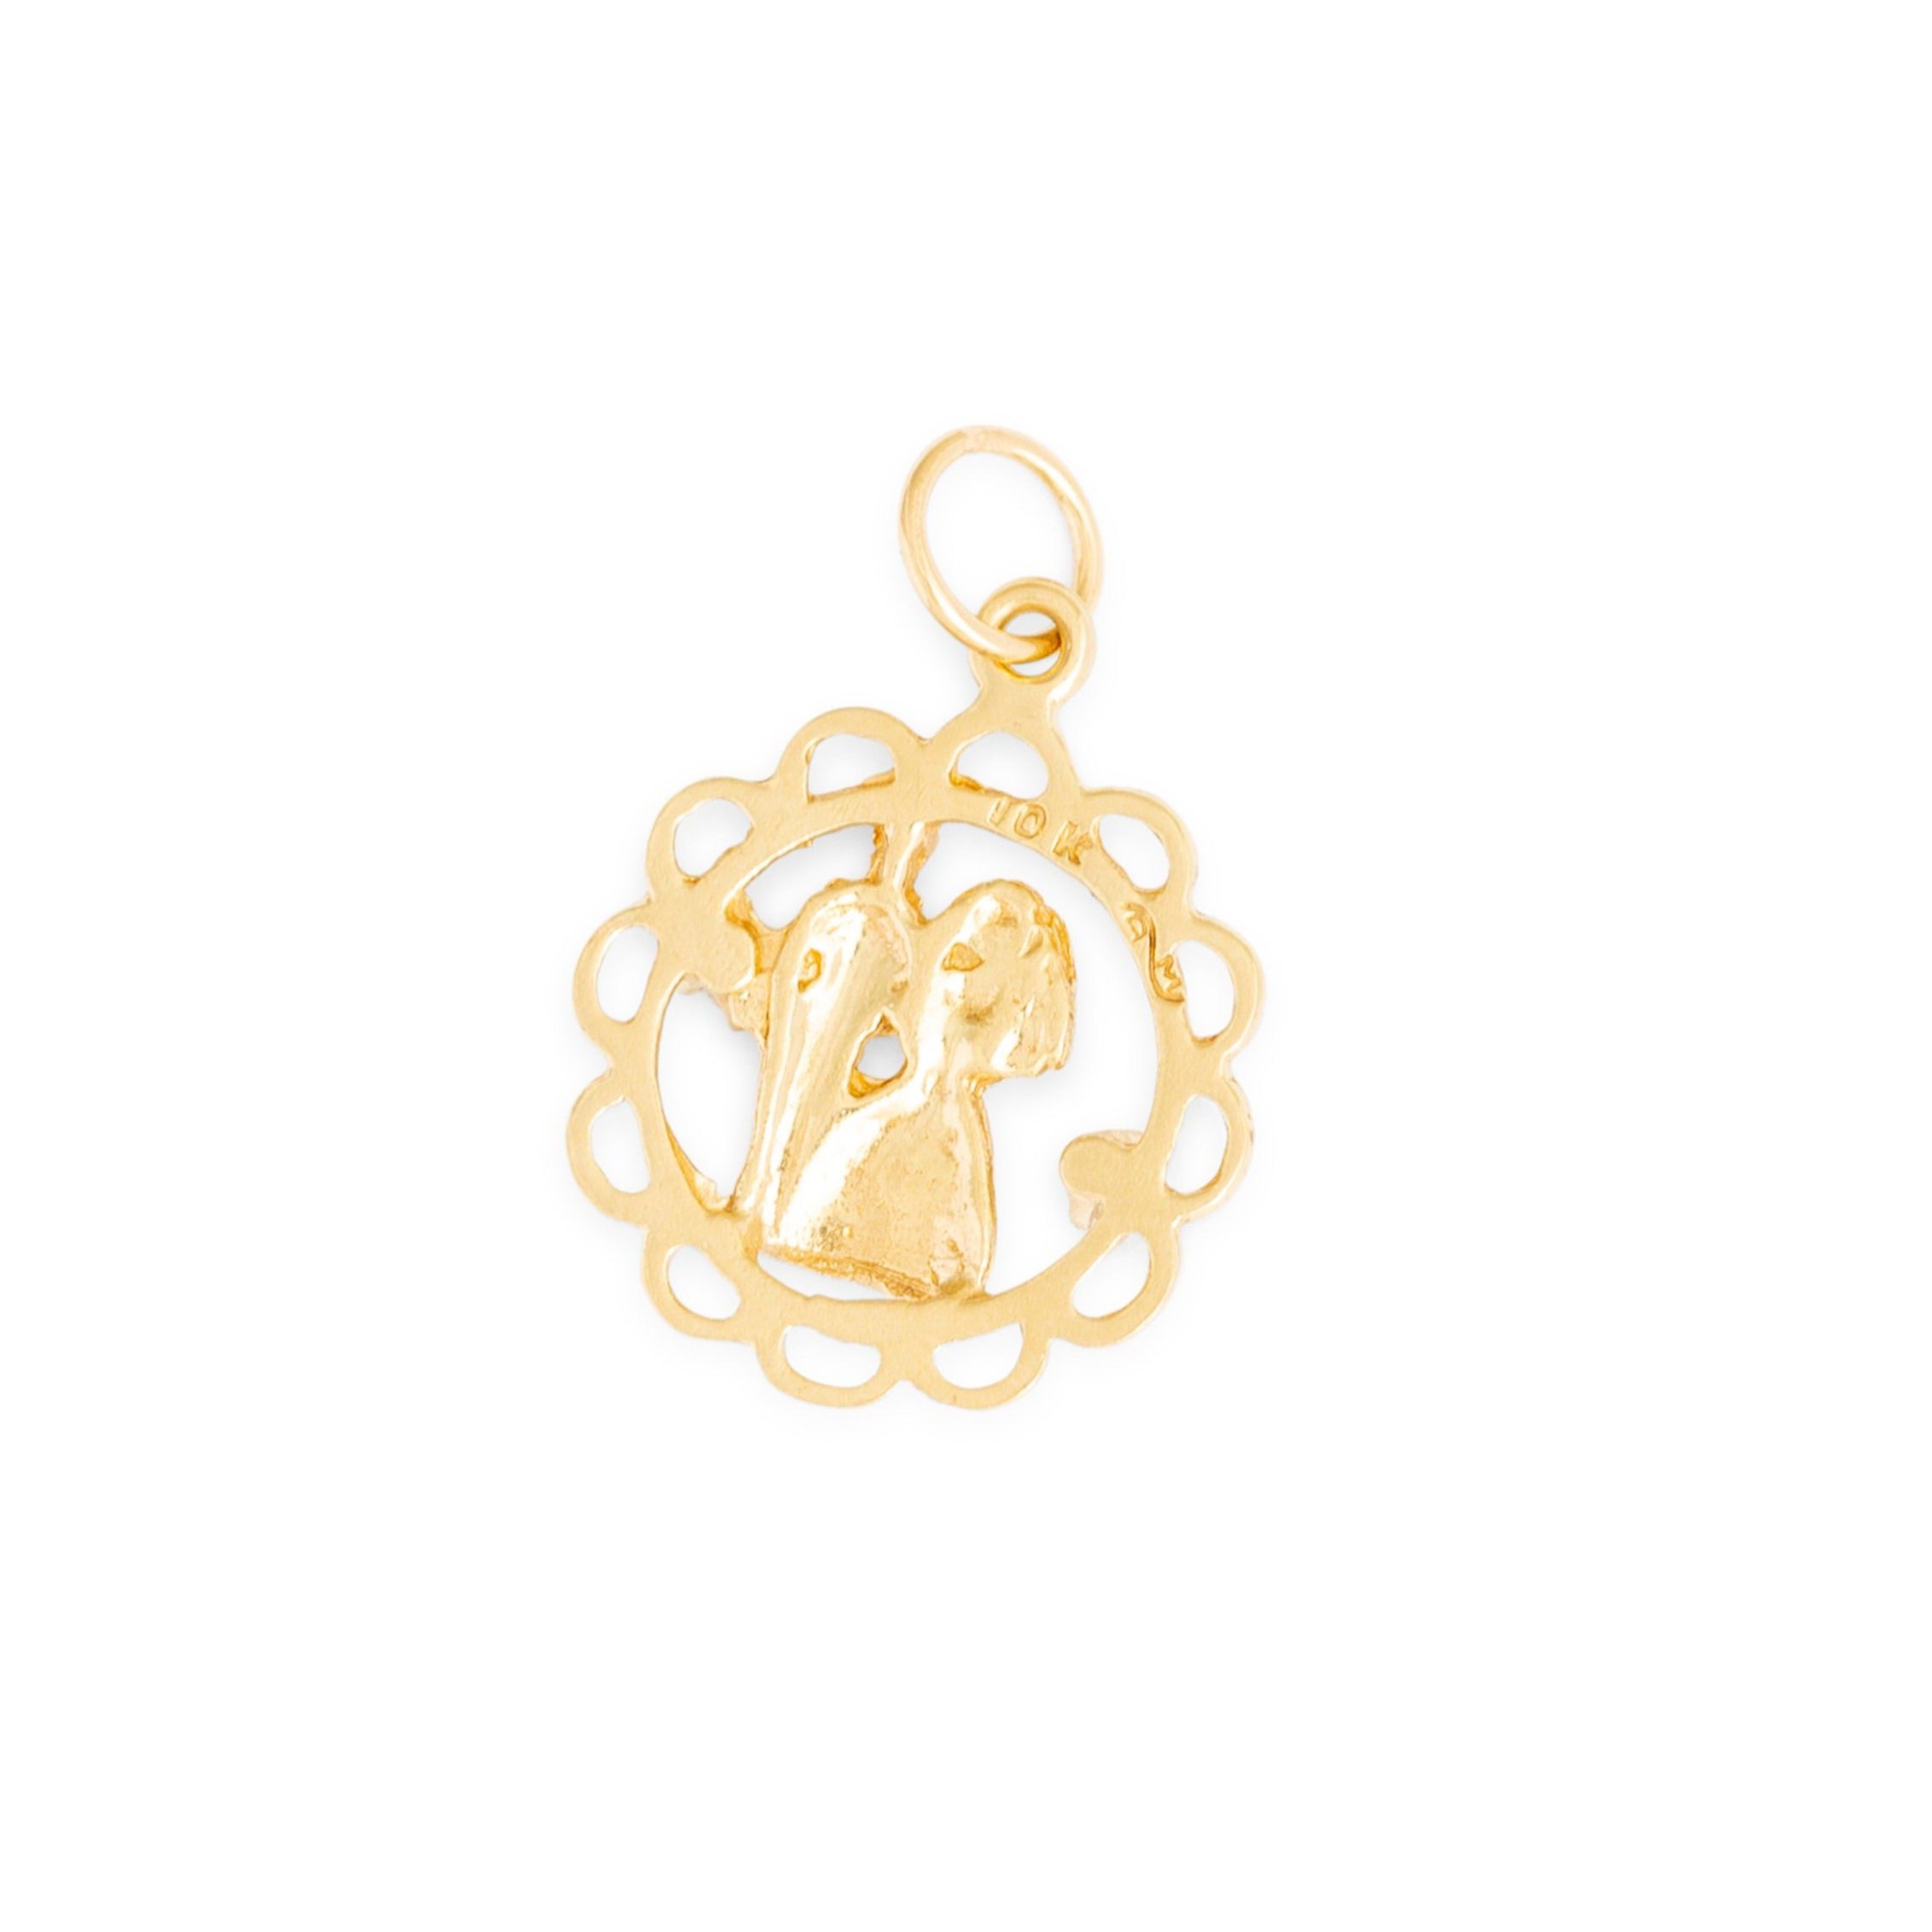 Bride and Groom Diamond and 10k Gold Charm